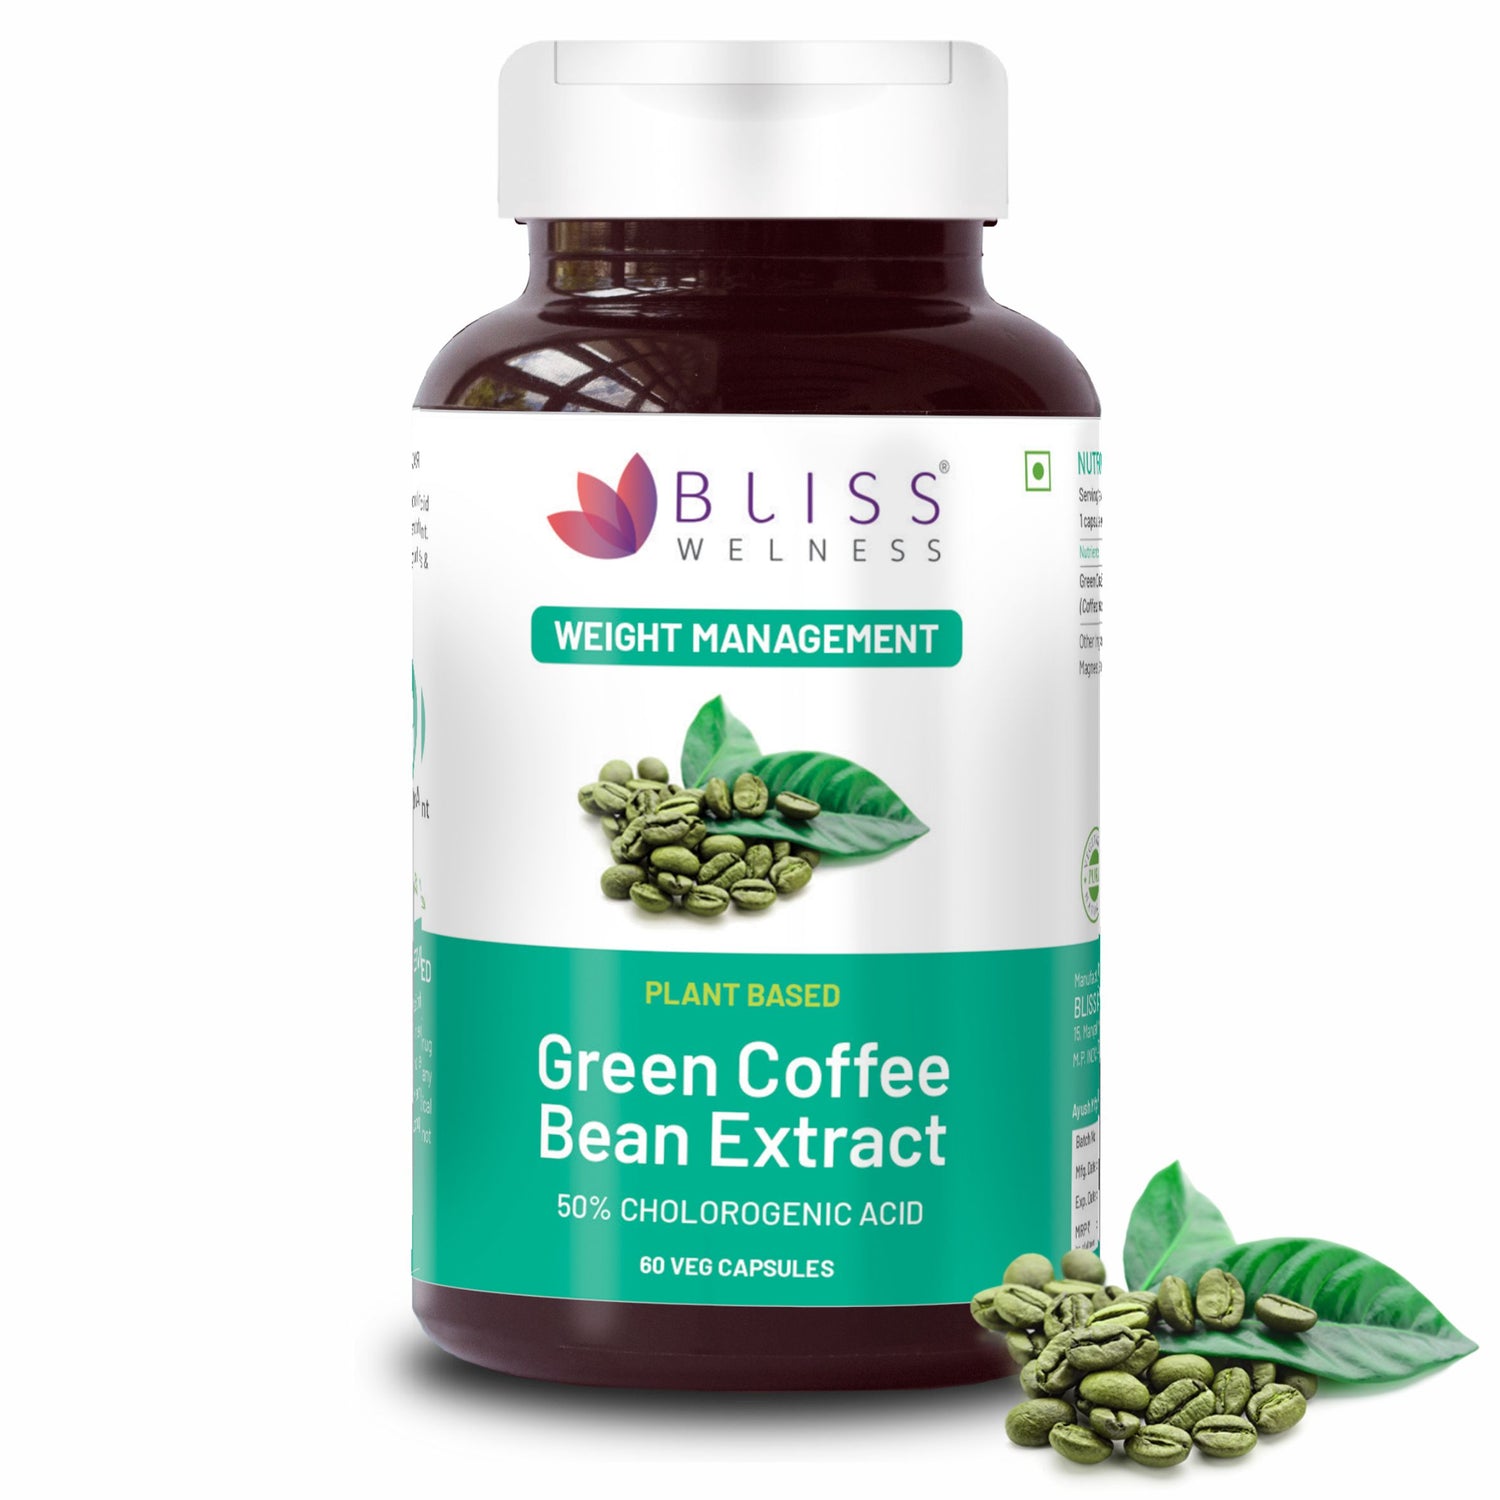 Bliss Welness Slim Bliss Pure Weight Management Appetite Control | Green Coffee Bean Extract 50% | Fatty Liver Care Enhance Metabolism Strong Antioxidant Natural Supplement - 60 Vegetarian Capsules